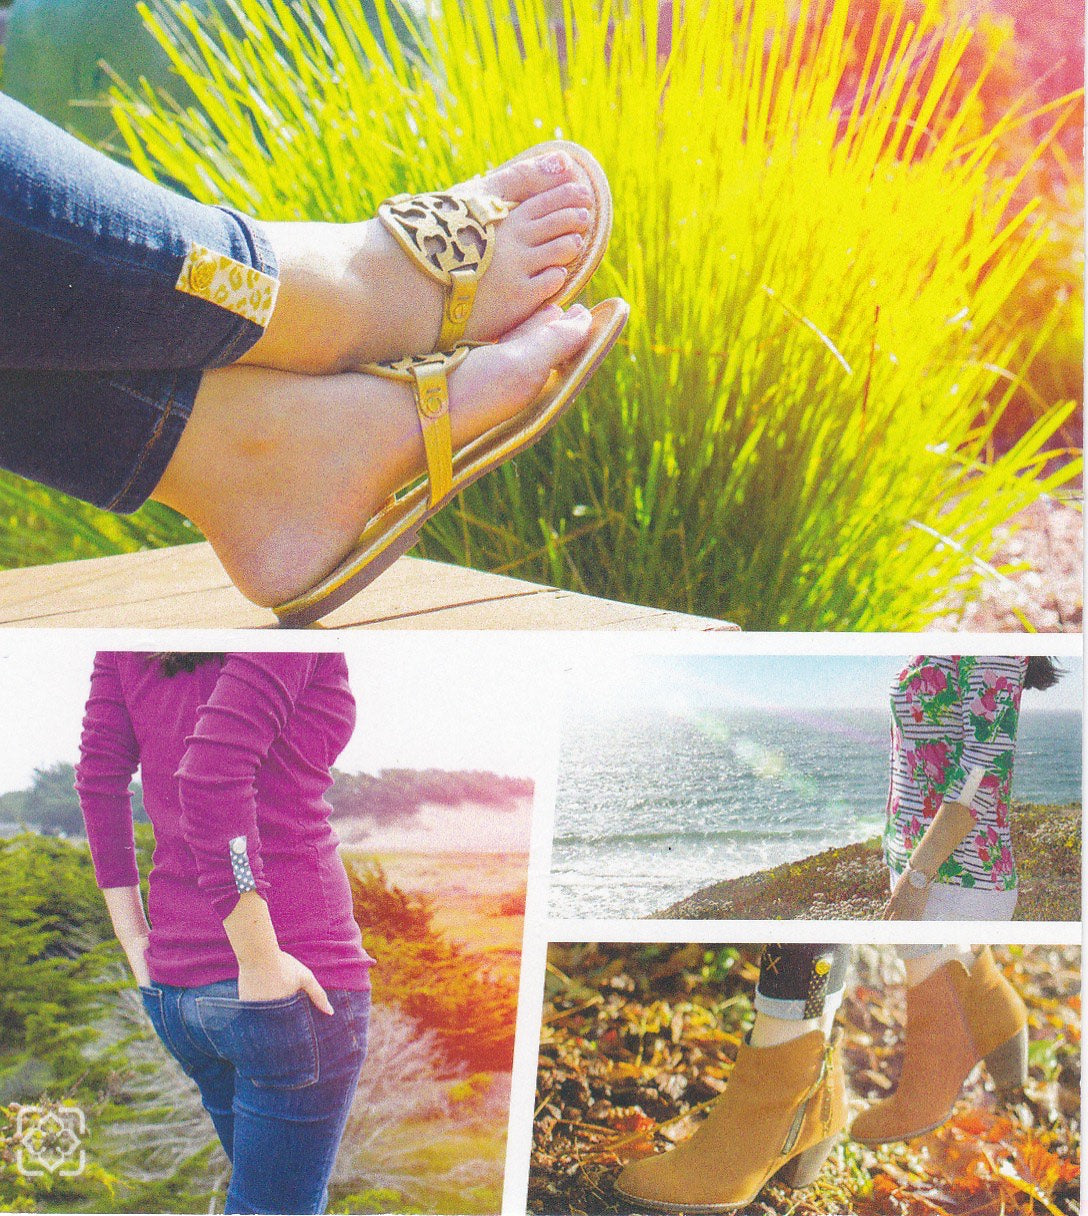 Back of packaging that shows 4 images of different ways to style your Poppyclip.  1. Shows a Poppyclip decorating the outer hem of jeans. 2. Lady in a long sleeve hot pink top, with a Poppyclip holding up a sleeve to ¾ length - her hand in her back pocket of her jeans.  3. Lady in a colorful blouse with a Poppyclip holding up her sleeve as she faces the ocean, 4. Lady wearing low-cut boots with a Poppyclip holding her cuffed jeans up for the perfect length. 